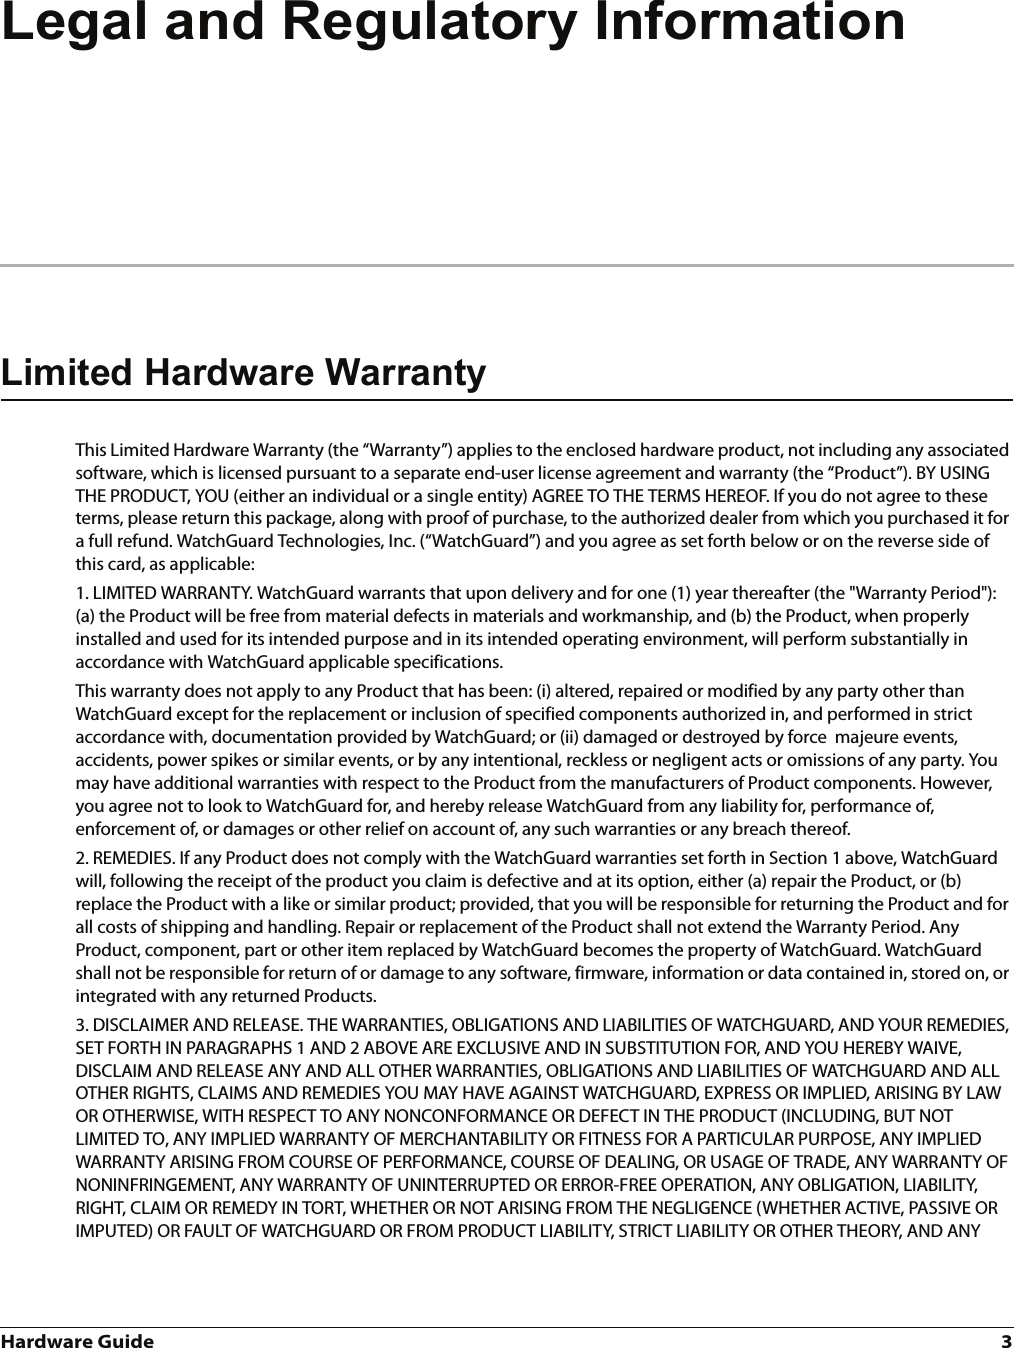 Hardware Guide 3Legal and Regulatory InformationLimited Hardware WarrantyThis Limited Hardware Warranty (the “Warranty”) applies to the enclosed hardware product, not including any associated software, which is licensed pursuant to a separate end-user license agreement and warranty (the “Product”). BY USING THE PRODUCT, YOU (either an individual or a single entity) AGREE TO THE TERMS HEREOF. If you do not agree to these terms, please return this package, along with proof of purchase, to the authorized dealer from which you purchased it for a full refund. WatchGuard Technologies, Inc. (“WatchGuard”) and you agree as set forth below or on the reverse side of this card, as applicable:1. LIMITED WARRANTY. WatchGuard warrants that upon delivery and for one (1) year thereafter (the &quot;Warranty Period&quot;): (a) the Product will be free from material defects in materials and workmanship, and (b) the Product, when properly installed and used for its intended purpose and in its intended operating environment, will perform substantially in accordance with WatchGuard applicable specifications.This warranty does not apply to any Product that has been: (i) altered, repaired or modified by any party other than WatchGuard except for the replacement or inclusion of specified components authorized in, and performed in strict accordance with, documentation provided by WatchGuard; or (ii) damaged or destroyed by force  majeure events, accidents, power spikes or similar events, or by any intentional, reckless or negligent acts or omissions of any party. You may have additional warranties with respect to the Product from the manufacturers of Product components. However, you agree not to look to WatchGuard for, and hereby release WatchGuard from any liability for, performance of, enforcement of, or damages or other relief on account of, any such warranties or any breach thereof.2. REMEDIES. If any Product does not comply with the WatchGuard warranties set forth in Section 1 above, WatchGuard will, following the receipt of the product you claim is defective and at its option, either (a) repair the Product, or (b) replace the Product with a like or similar product; provided, that you will be responsible for returning the Product and for all costs of shipping and handling. Repair or replacement of the Product shall not extend the Warranty Period. Any Product, component, part or other item replaced by WatchGuard becomes the property of WatchGuard. WatchGuard shall not be responsible for return of or damage to any software, firmware, information or data contained in, stored on, or integrated with any returned Products.3. DISCLAIMER AND RELEASE. THE WARRANTIES, OBLIGATIONS AND LIABILITIES OF WATCHGUARD, AND YOUR REMEDIES, SET FORTH IN PARAGRAPHS 1 AND 2 ABOVE ARE EXCLUSIVE AND IN SUBSTITUTION FOR, AND YOU HEREBY WAIVE, DISCLAIM AND RELEASE ANY AND ALL OTHER WARRANTIES, OBLIGATIONS AND LIABILITIES OF WATCHGUARD AND ALL OTHER RIGHTS, CLAIMS AND REMEDIES YOU MAY HAVE AGAINST WATCHGUARD, EXPRESS OR IMPLIED, ARISING BY LAW OR OTHERWISE, WITH RESPECT TO ANY NONCONFORMANCE OR DEFECT IN THE PRODUCT (INCLUDING, BUT NOT LIMITED TO, ANY IMPLIED WARRANTY OF MERCHANTABILITY OR FITNESS FOR A PARTICULAR PURPOSE, ANY IMPLIED WARRANTY ARISING FROM COURSE OF PERFORMANCE, COURSE OF DEALING, OR USAGE OF TRADE, ANY WARRANTY OF NONINFRINGEMENT, ANY WARRANTY OF UNINTERRUPTED OR ERROR-FREE OPERATION, ANY OBLIGATION, LIABILITY, RIGHT, CLAIM OR REMEDY IN TORT, WHETHER OR NOT ARISING FROM THE NEGLIGENCE (WHETHER ACTIVE, PASSIVE OR IMPUTED) OR FAULT OF WATCHGUARD OR FROM PRODUCT LIABILITY, STRICT LIABILITY OR OTHER THEORY, AND ANY 